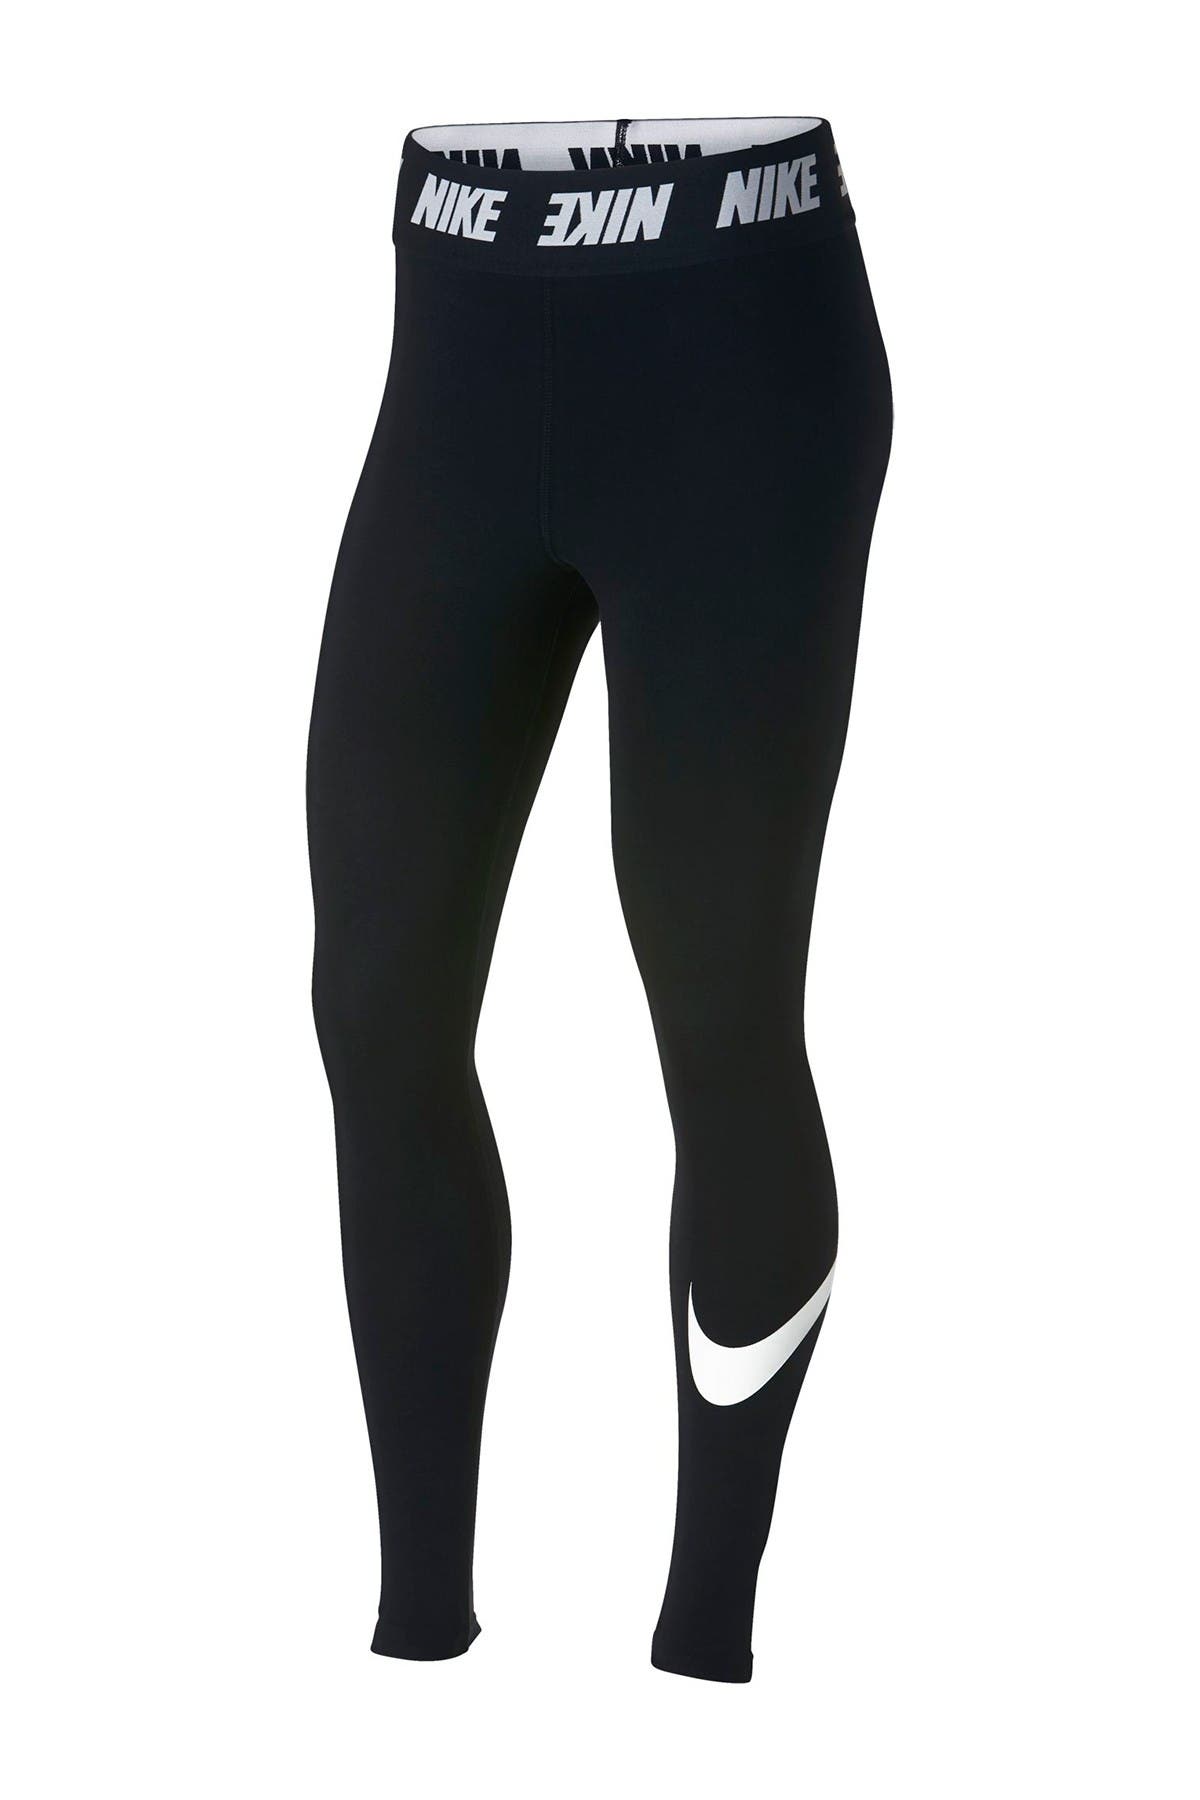 black and white nike tights